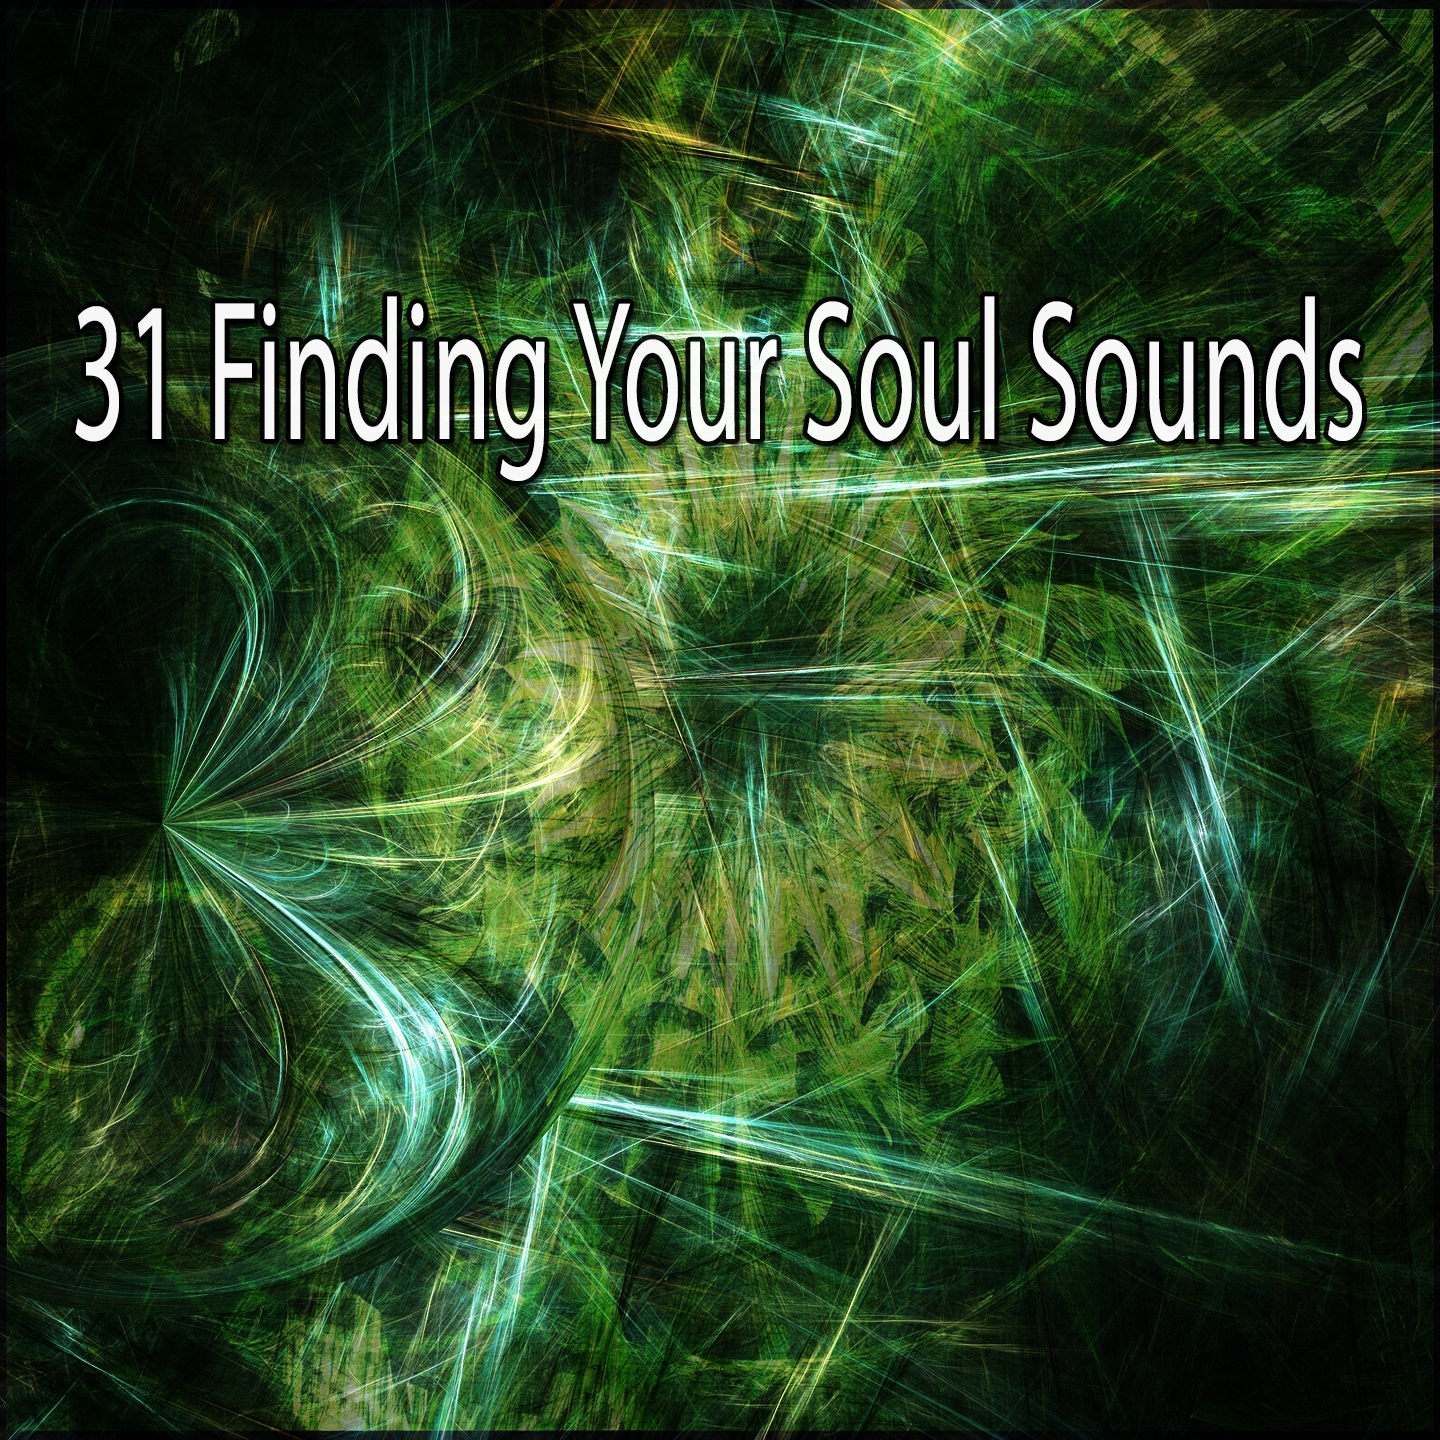 31 Finding Your Soul Sounds